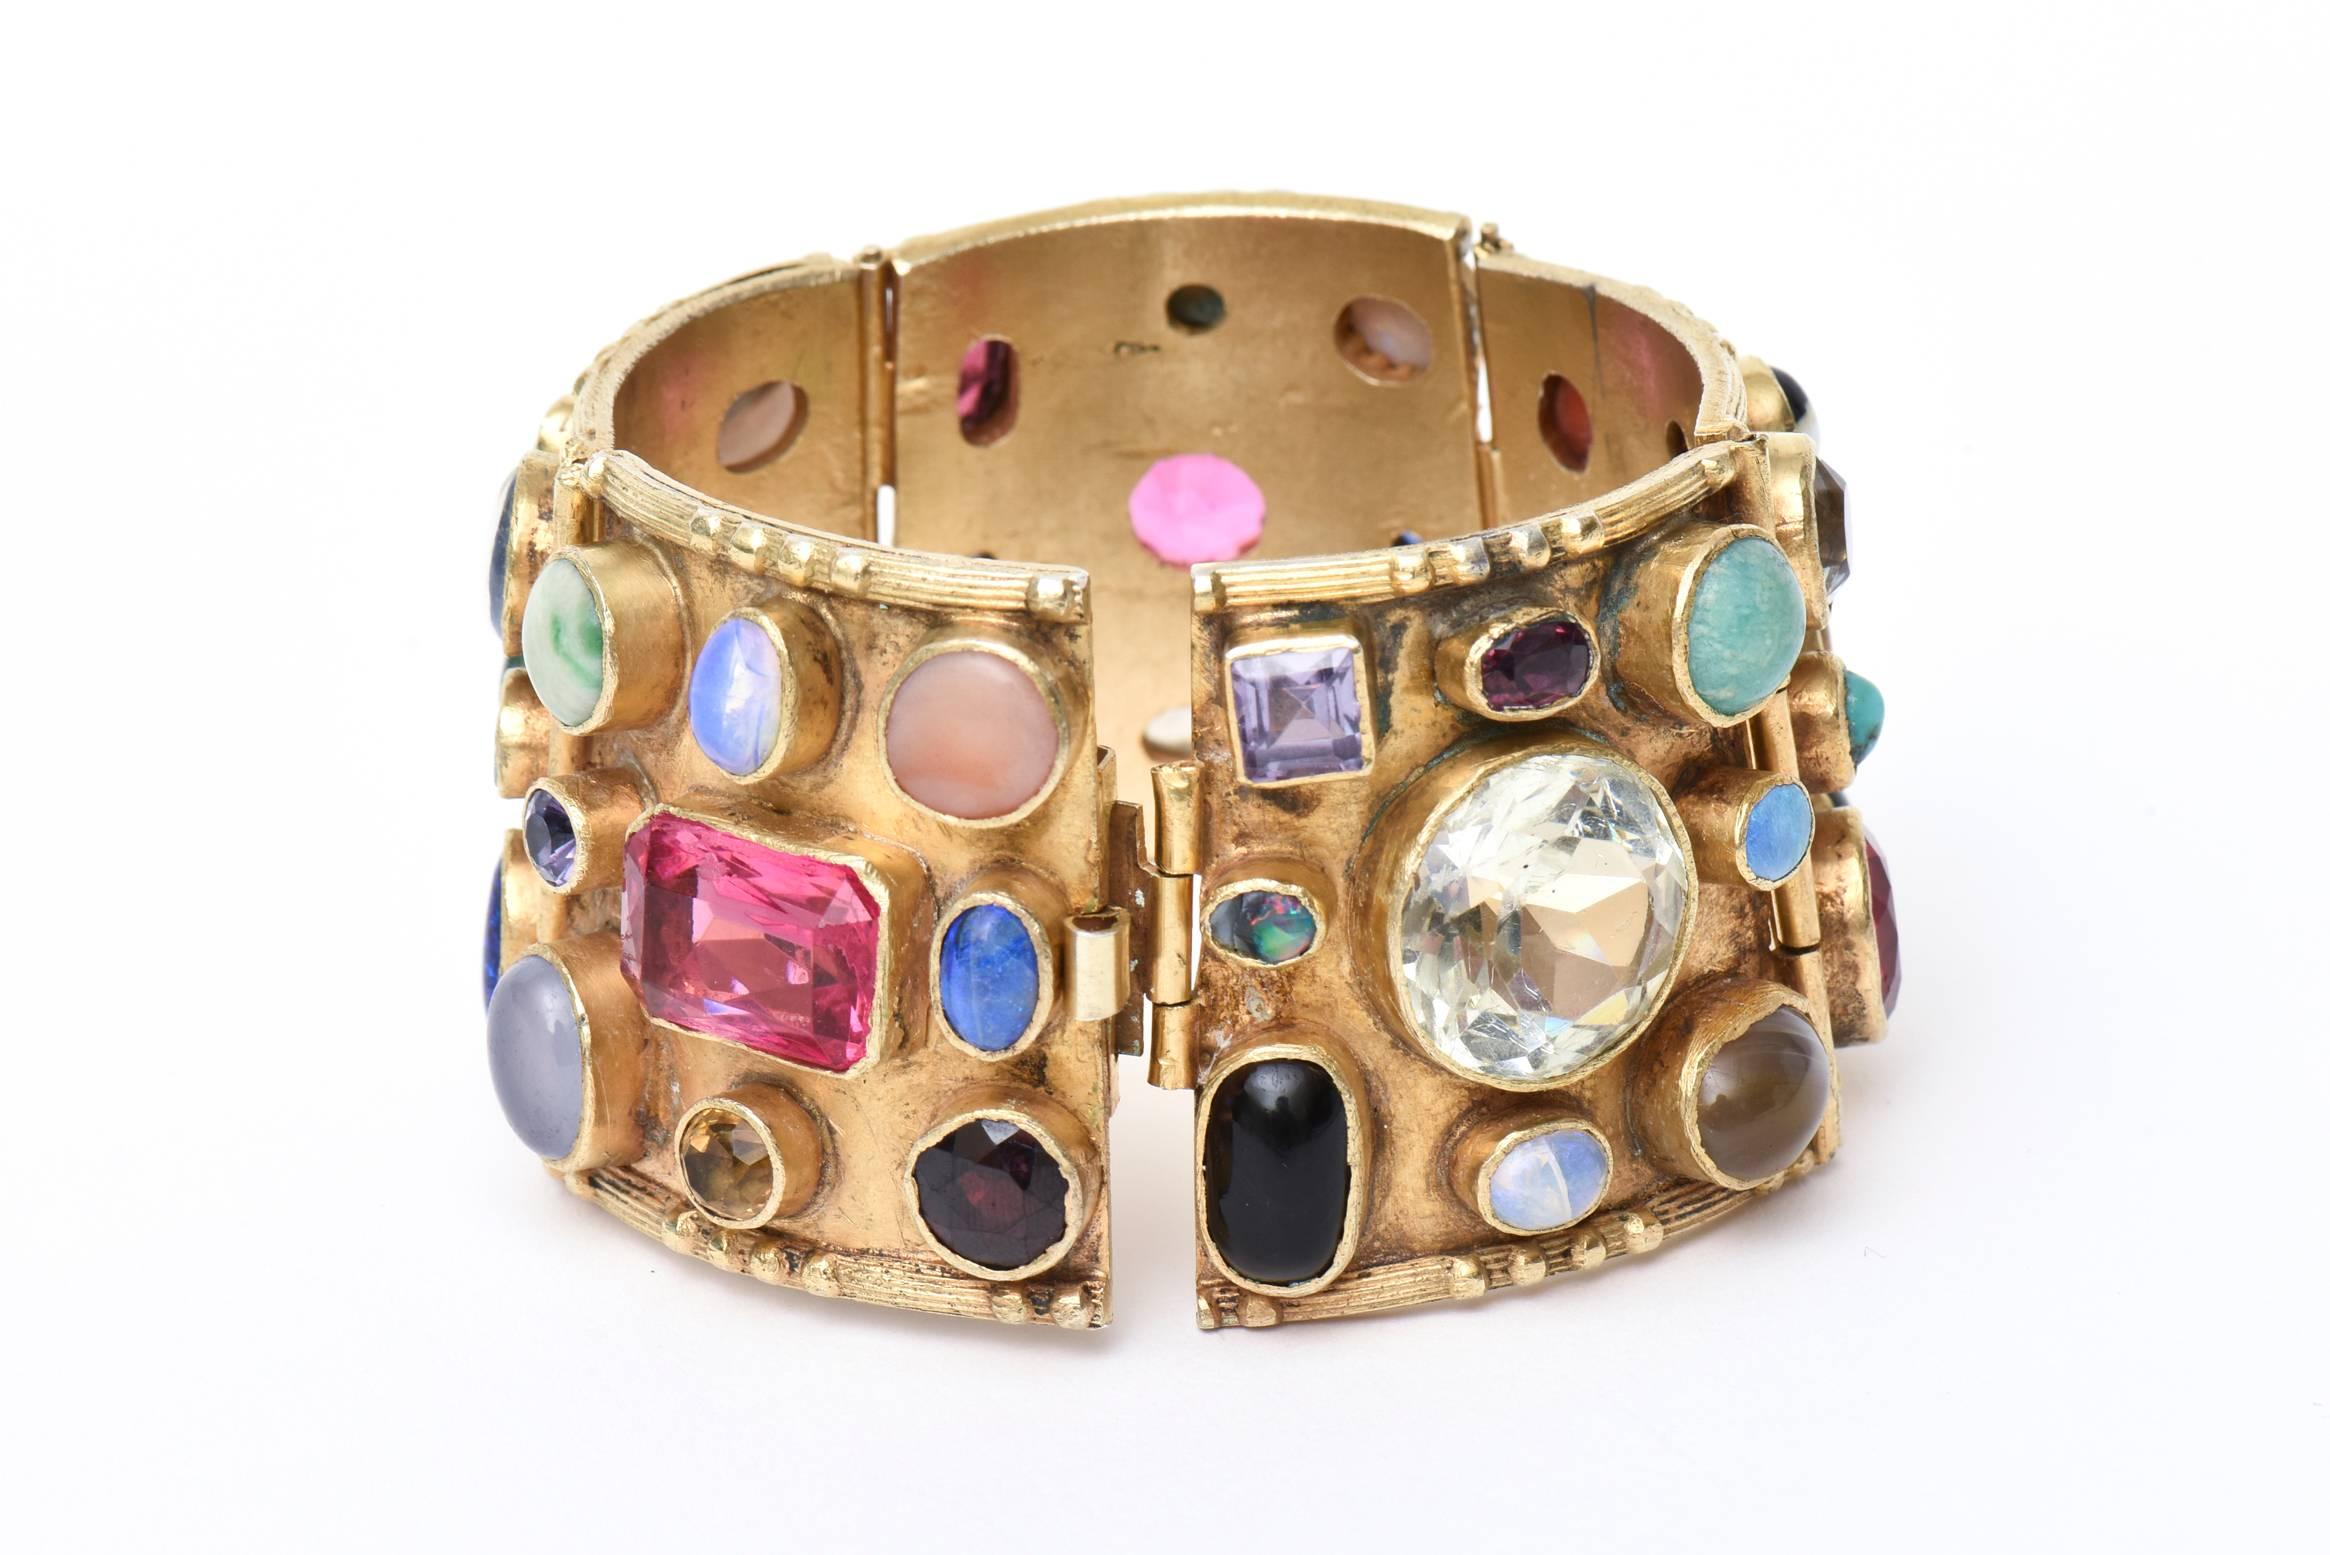 This amazing and gorgeous cuff bracelet is so arresting. It is gold plated over sterling silver with a magnificent array of semi precious stones. There is coral, turquoise, quartz, amethyst and many other semi precious stones and rhinestones and